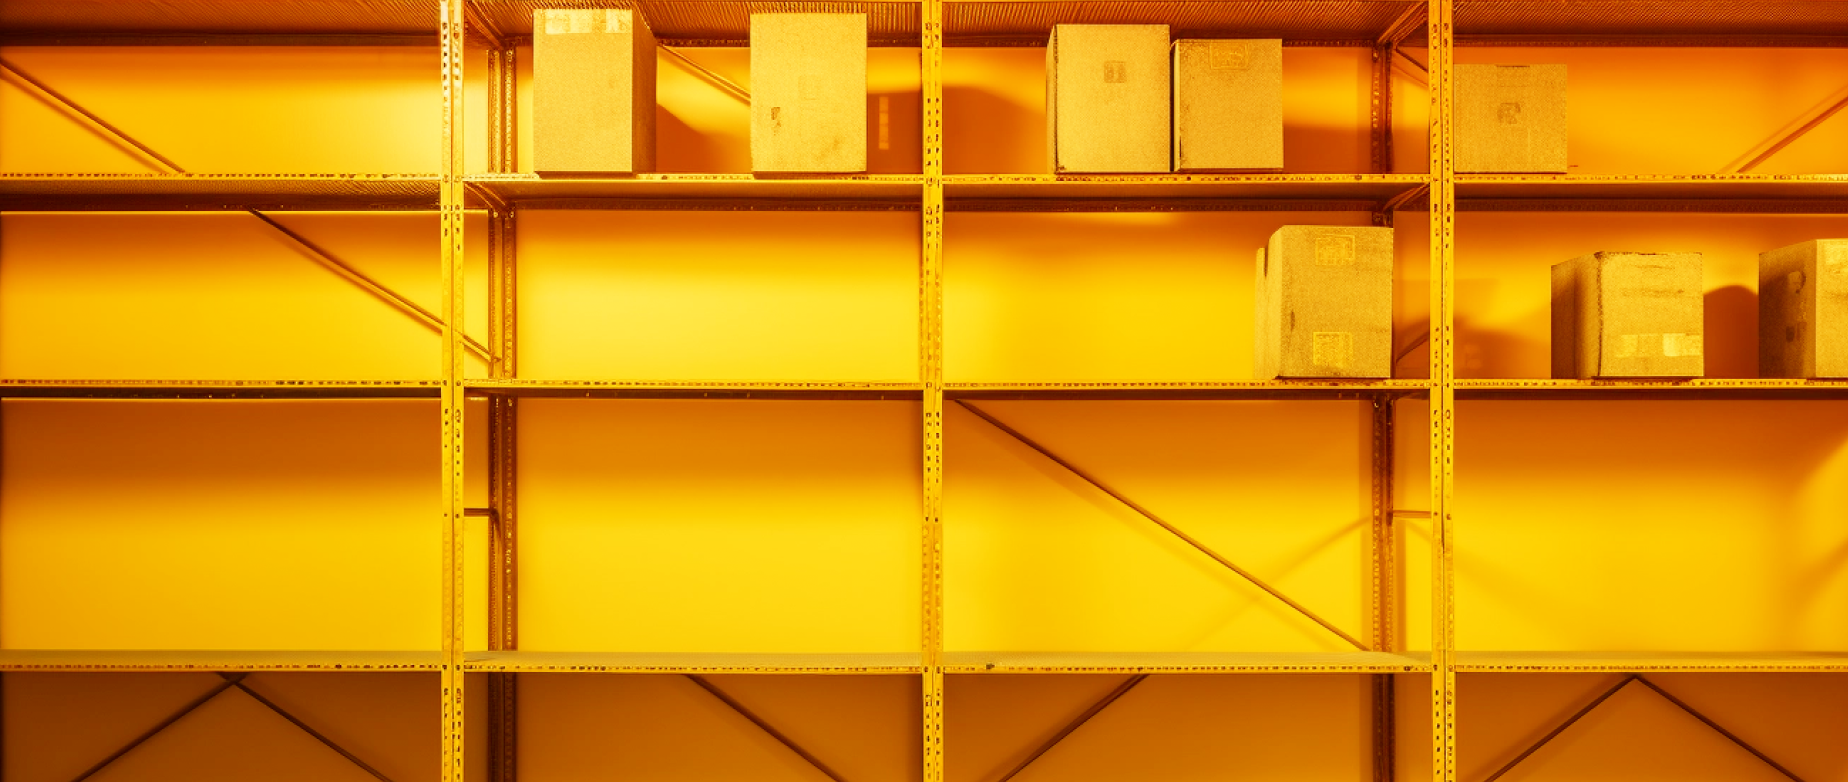 Empty storage room shelves with a few cardboard boxes illuminated by an orange light.